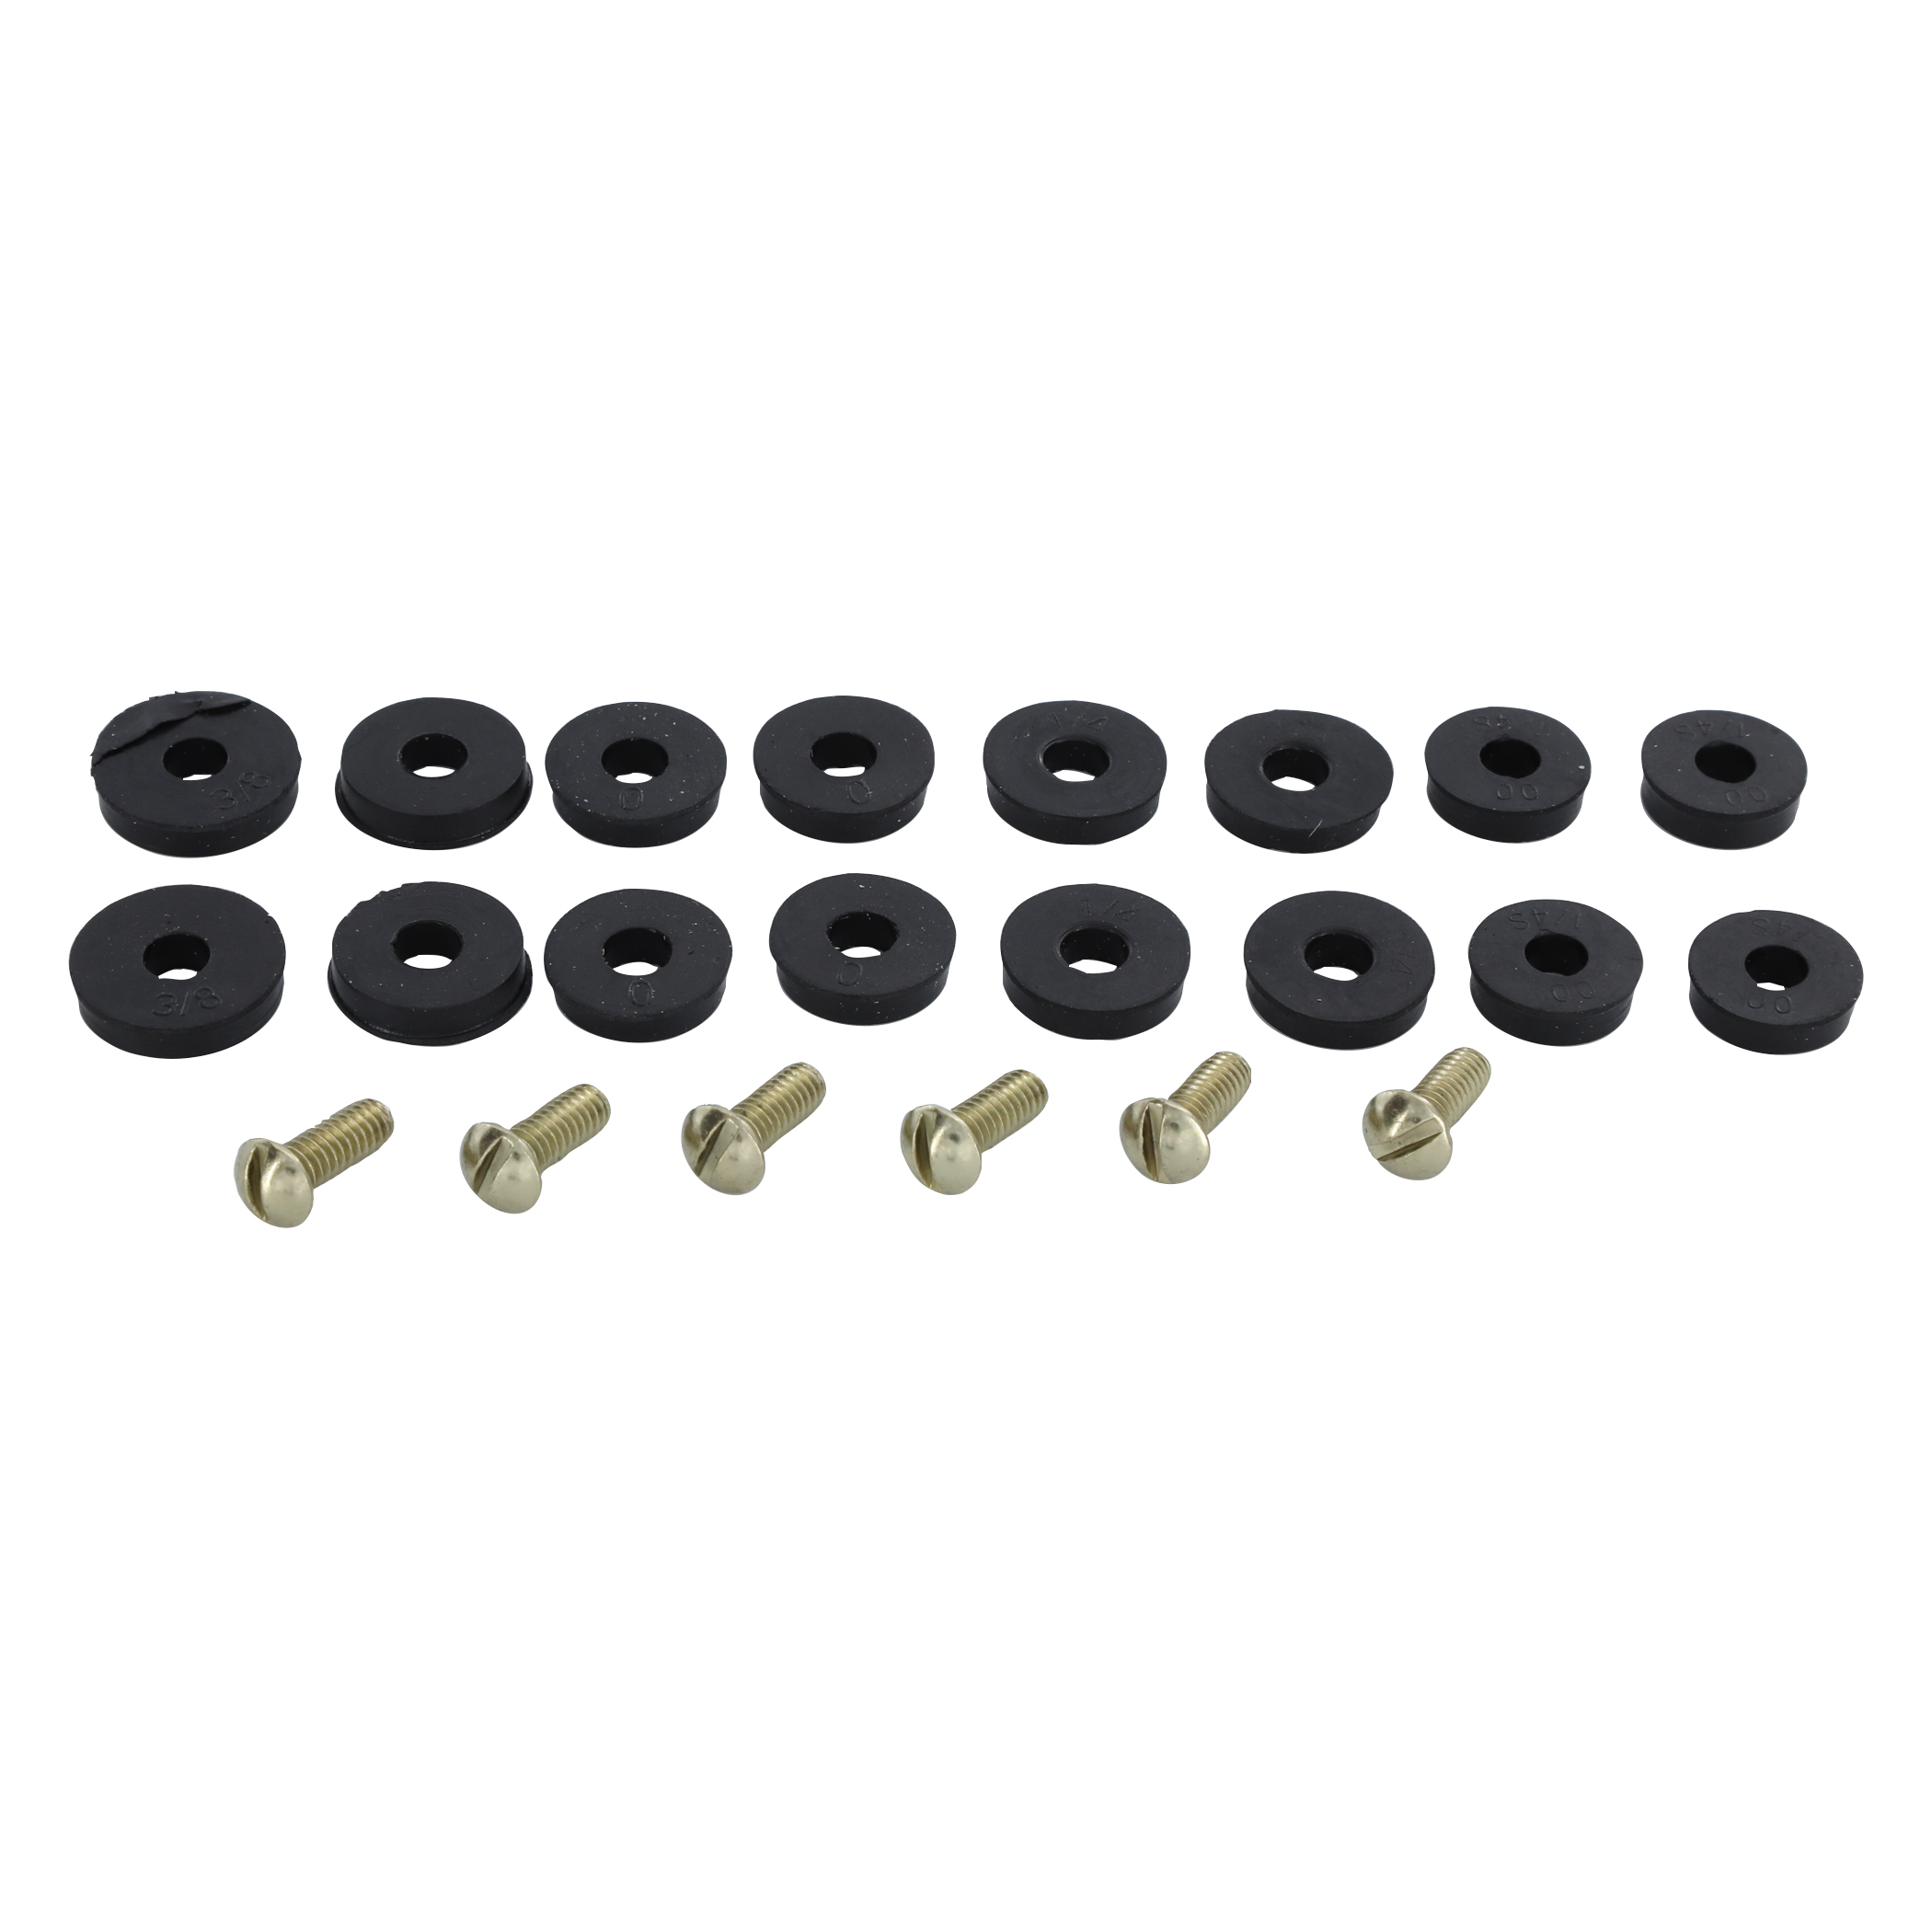 Flat Faucet Washer Assortment (22 per Package)